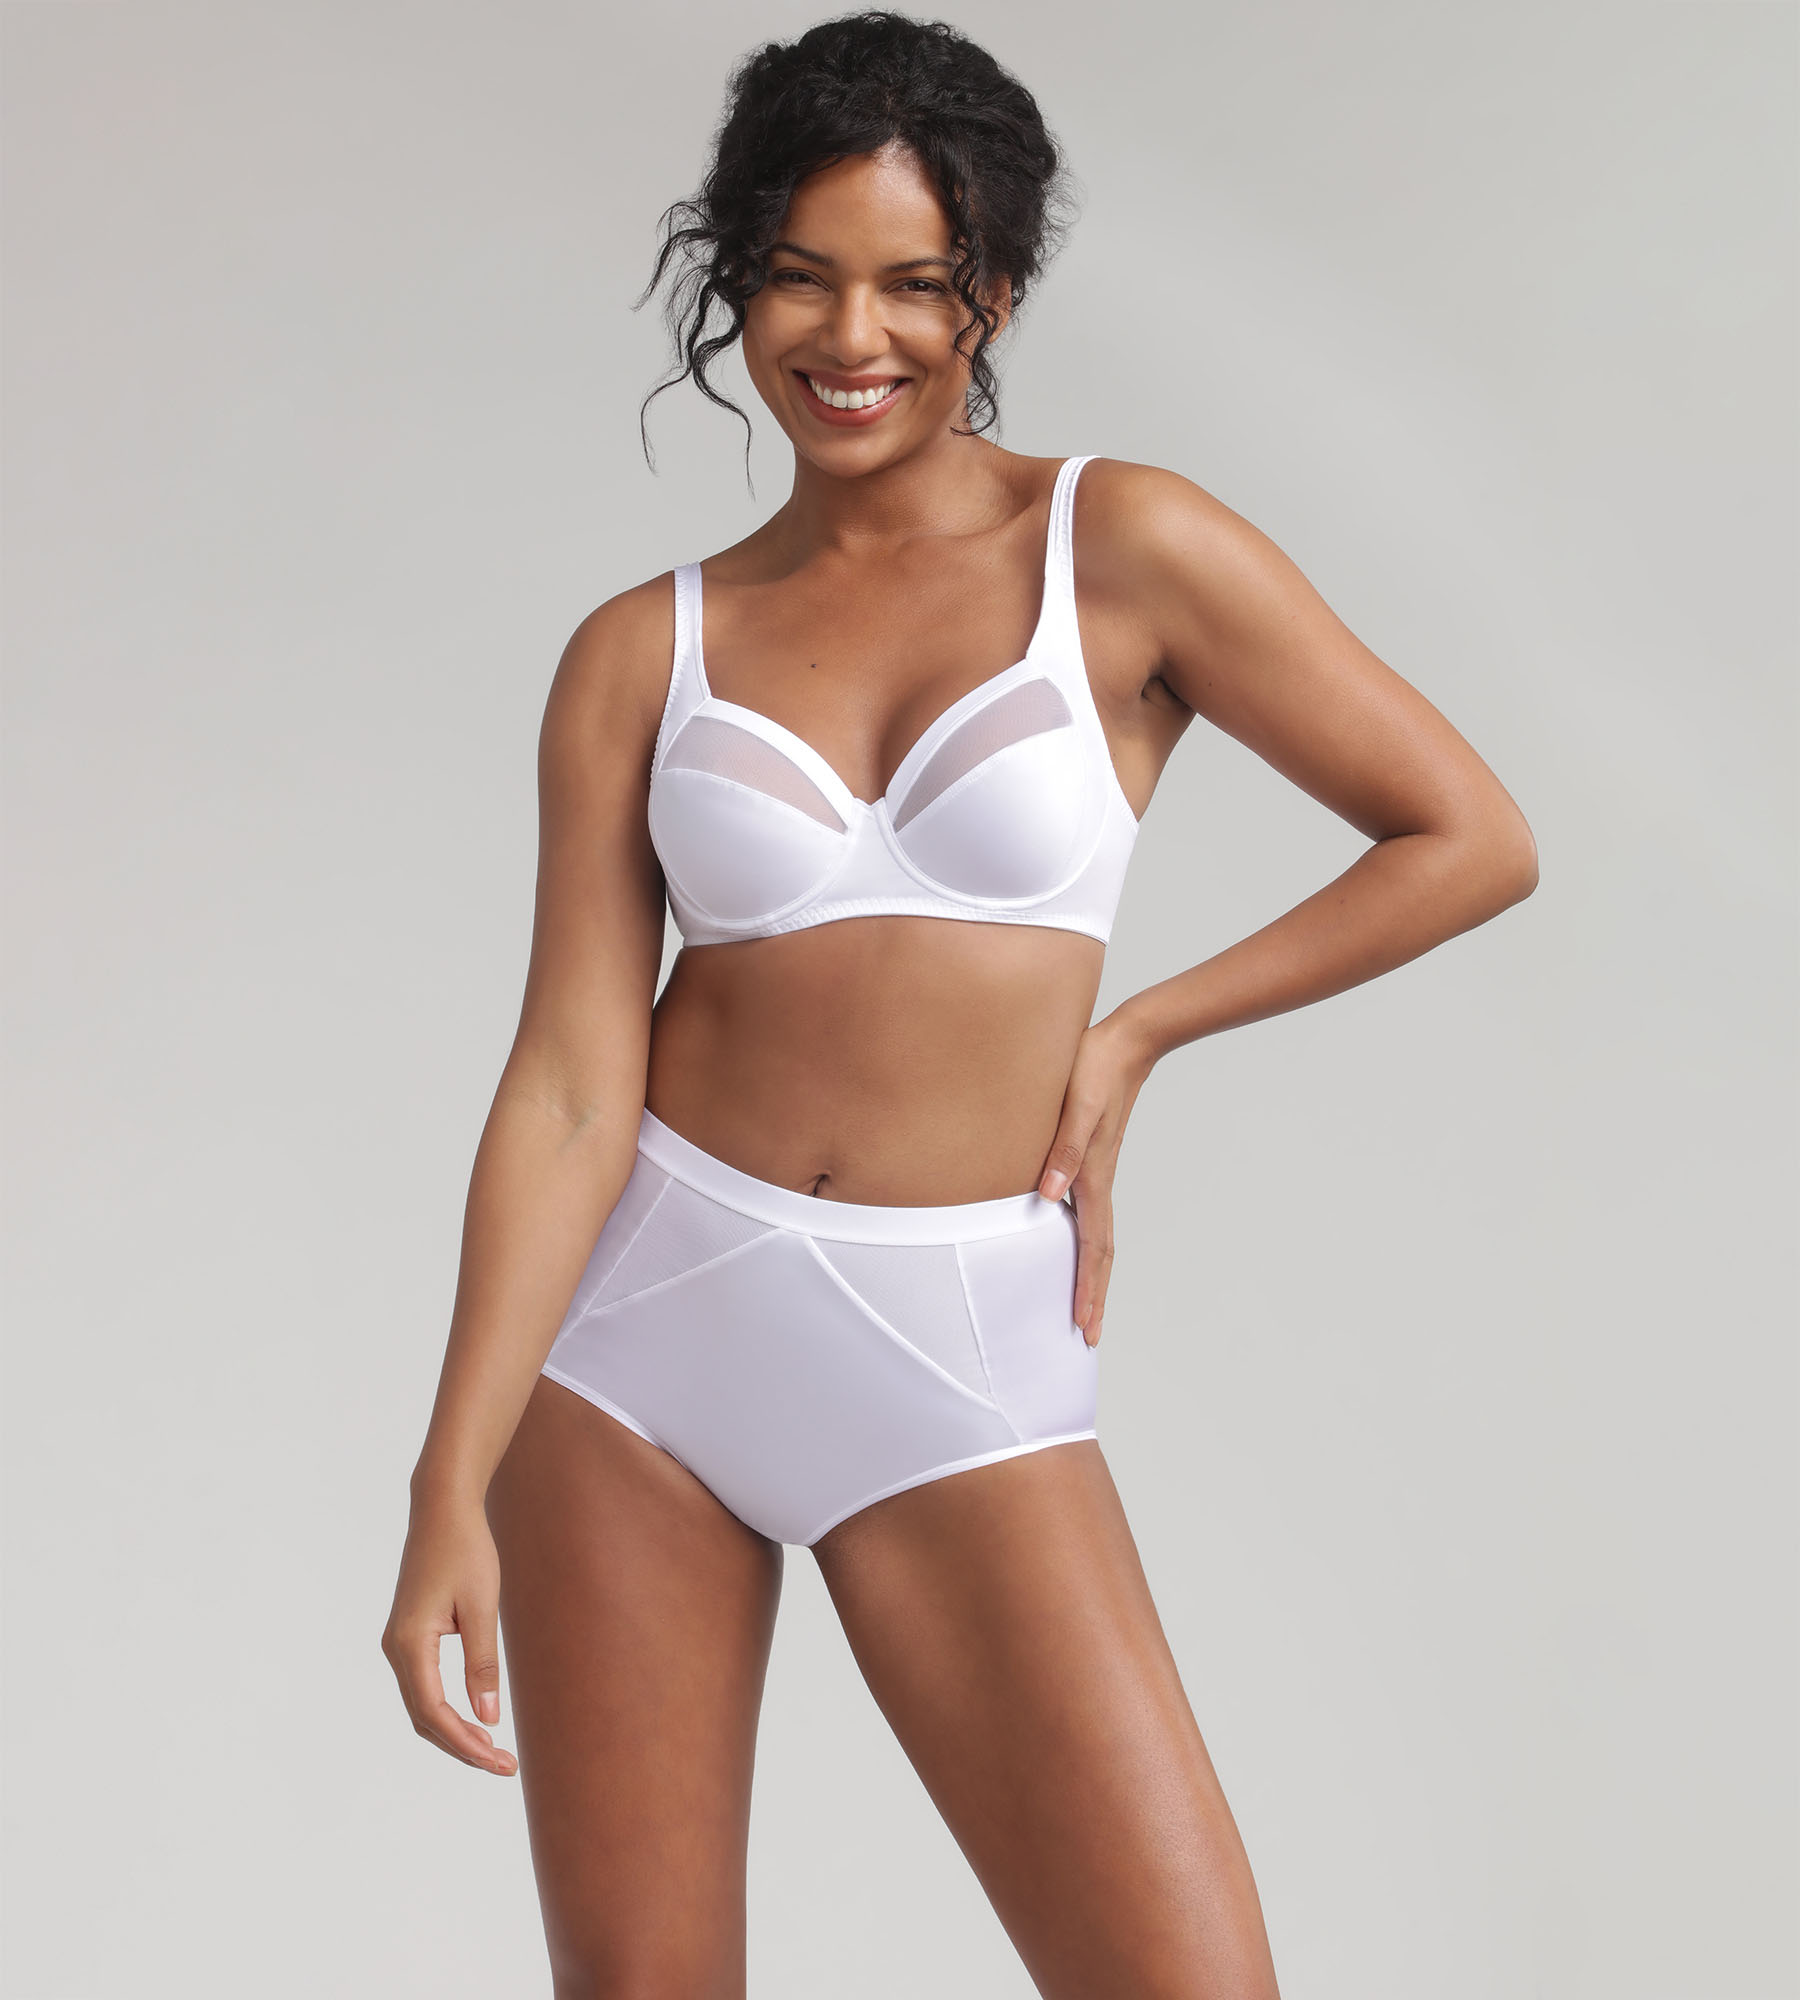 Shaping Maxi Brief in White – Perfect Silhouette, , PLAYTEX